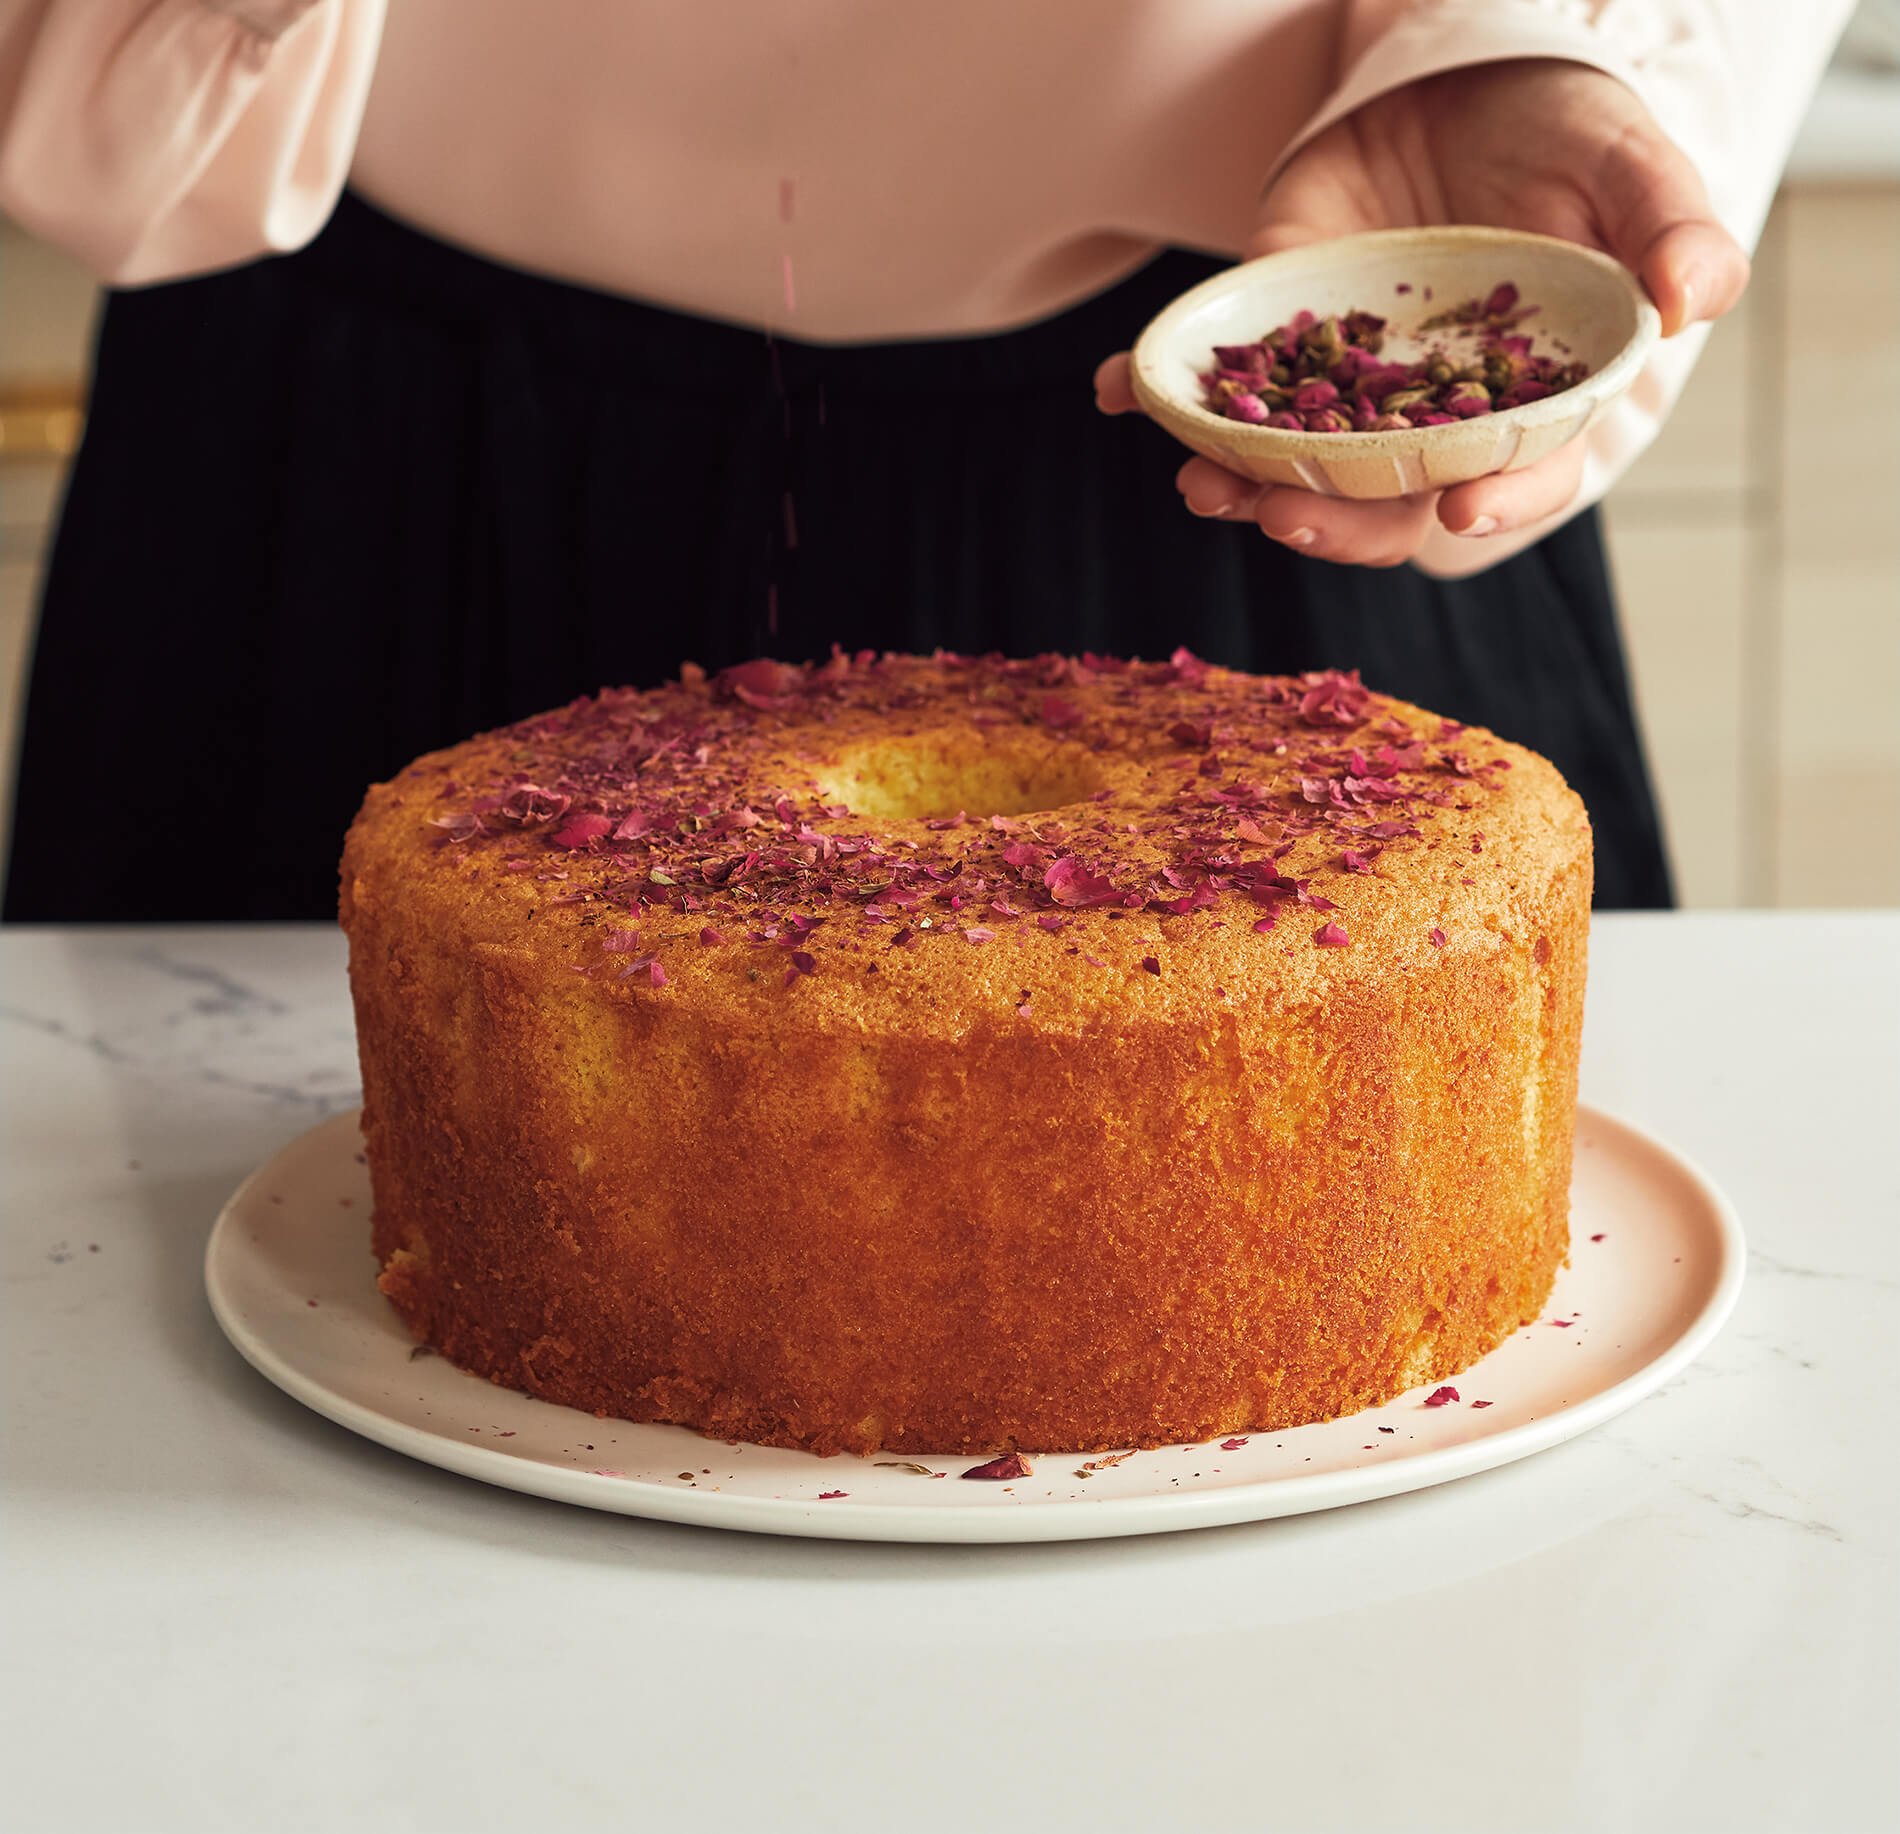 A person in a silk pink top sprinkles dried rose petals on a bundt cake over a white countertop